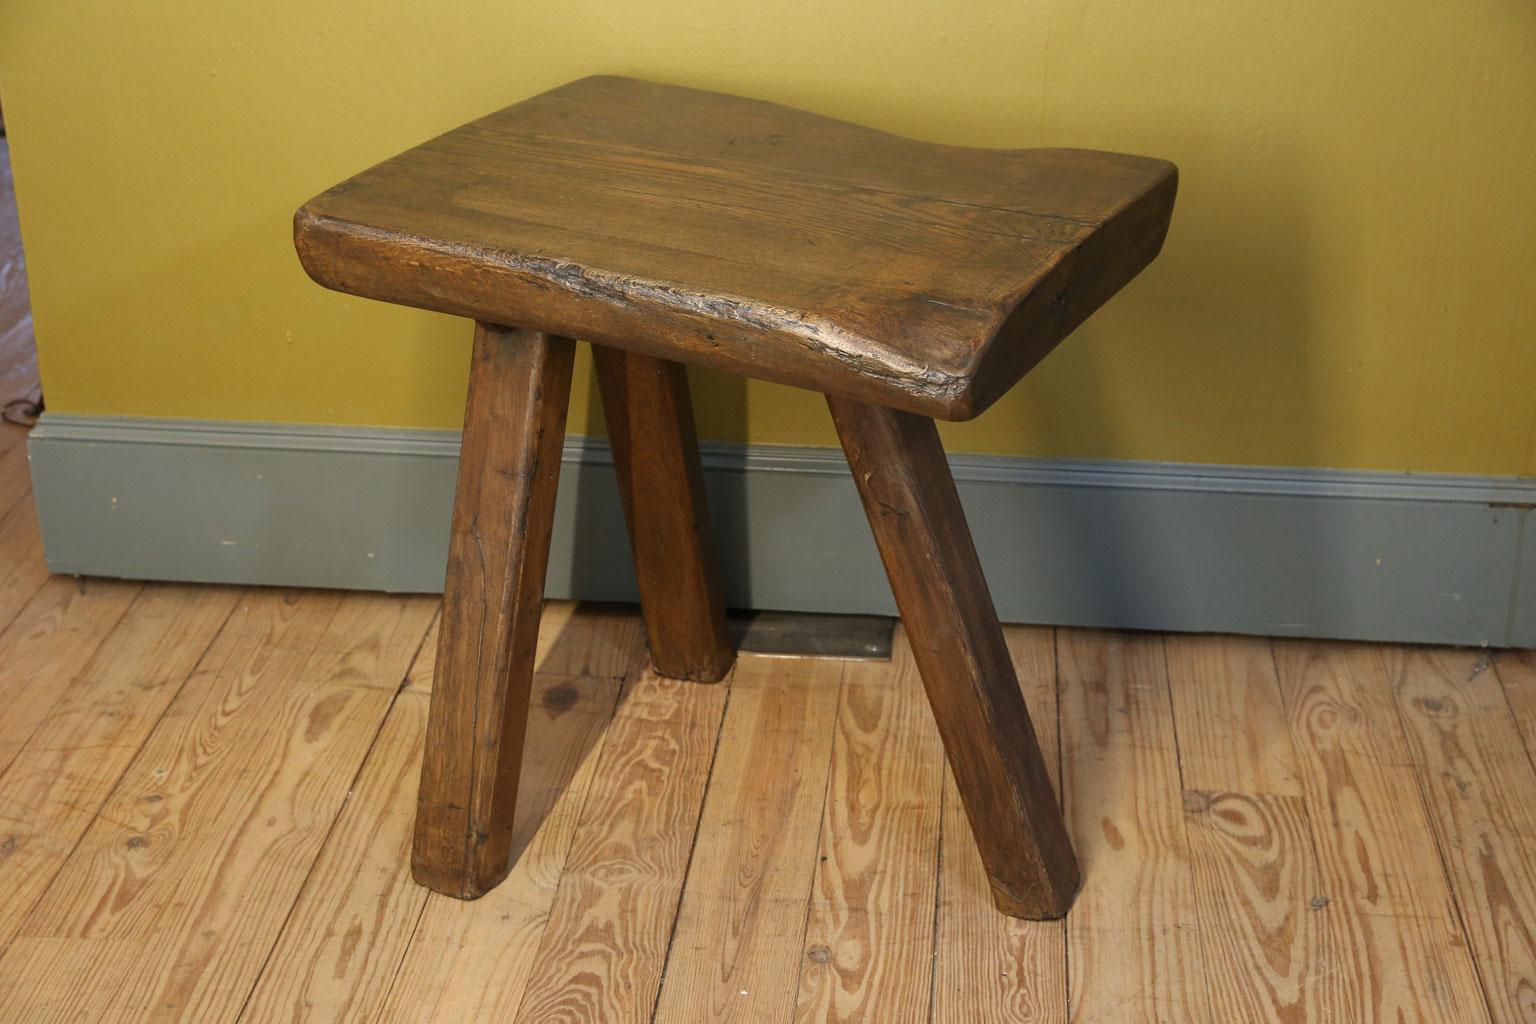 Mid-20th Century Chunky Massive Side Table or Stool With a Primitive , Rustic Feel